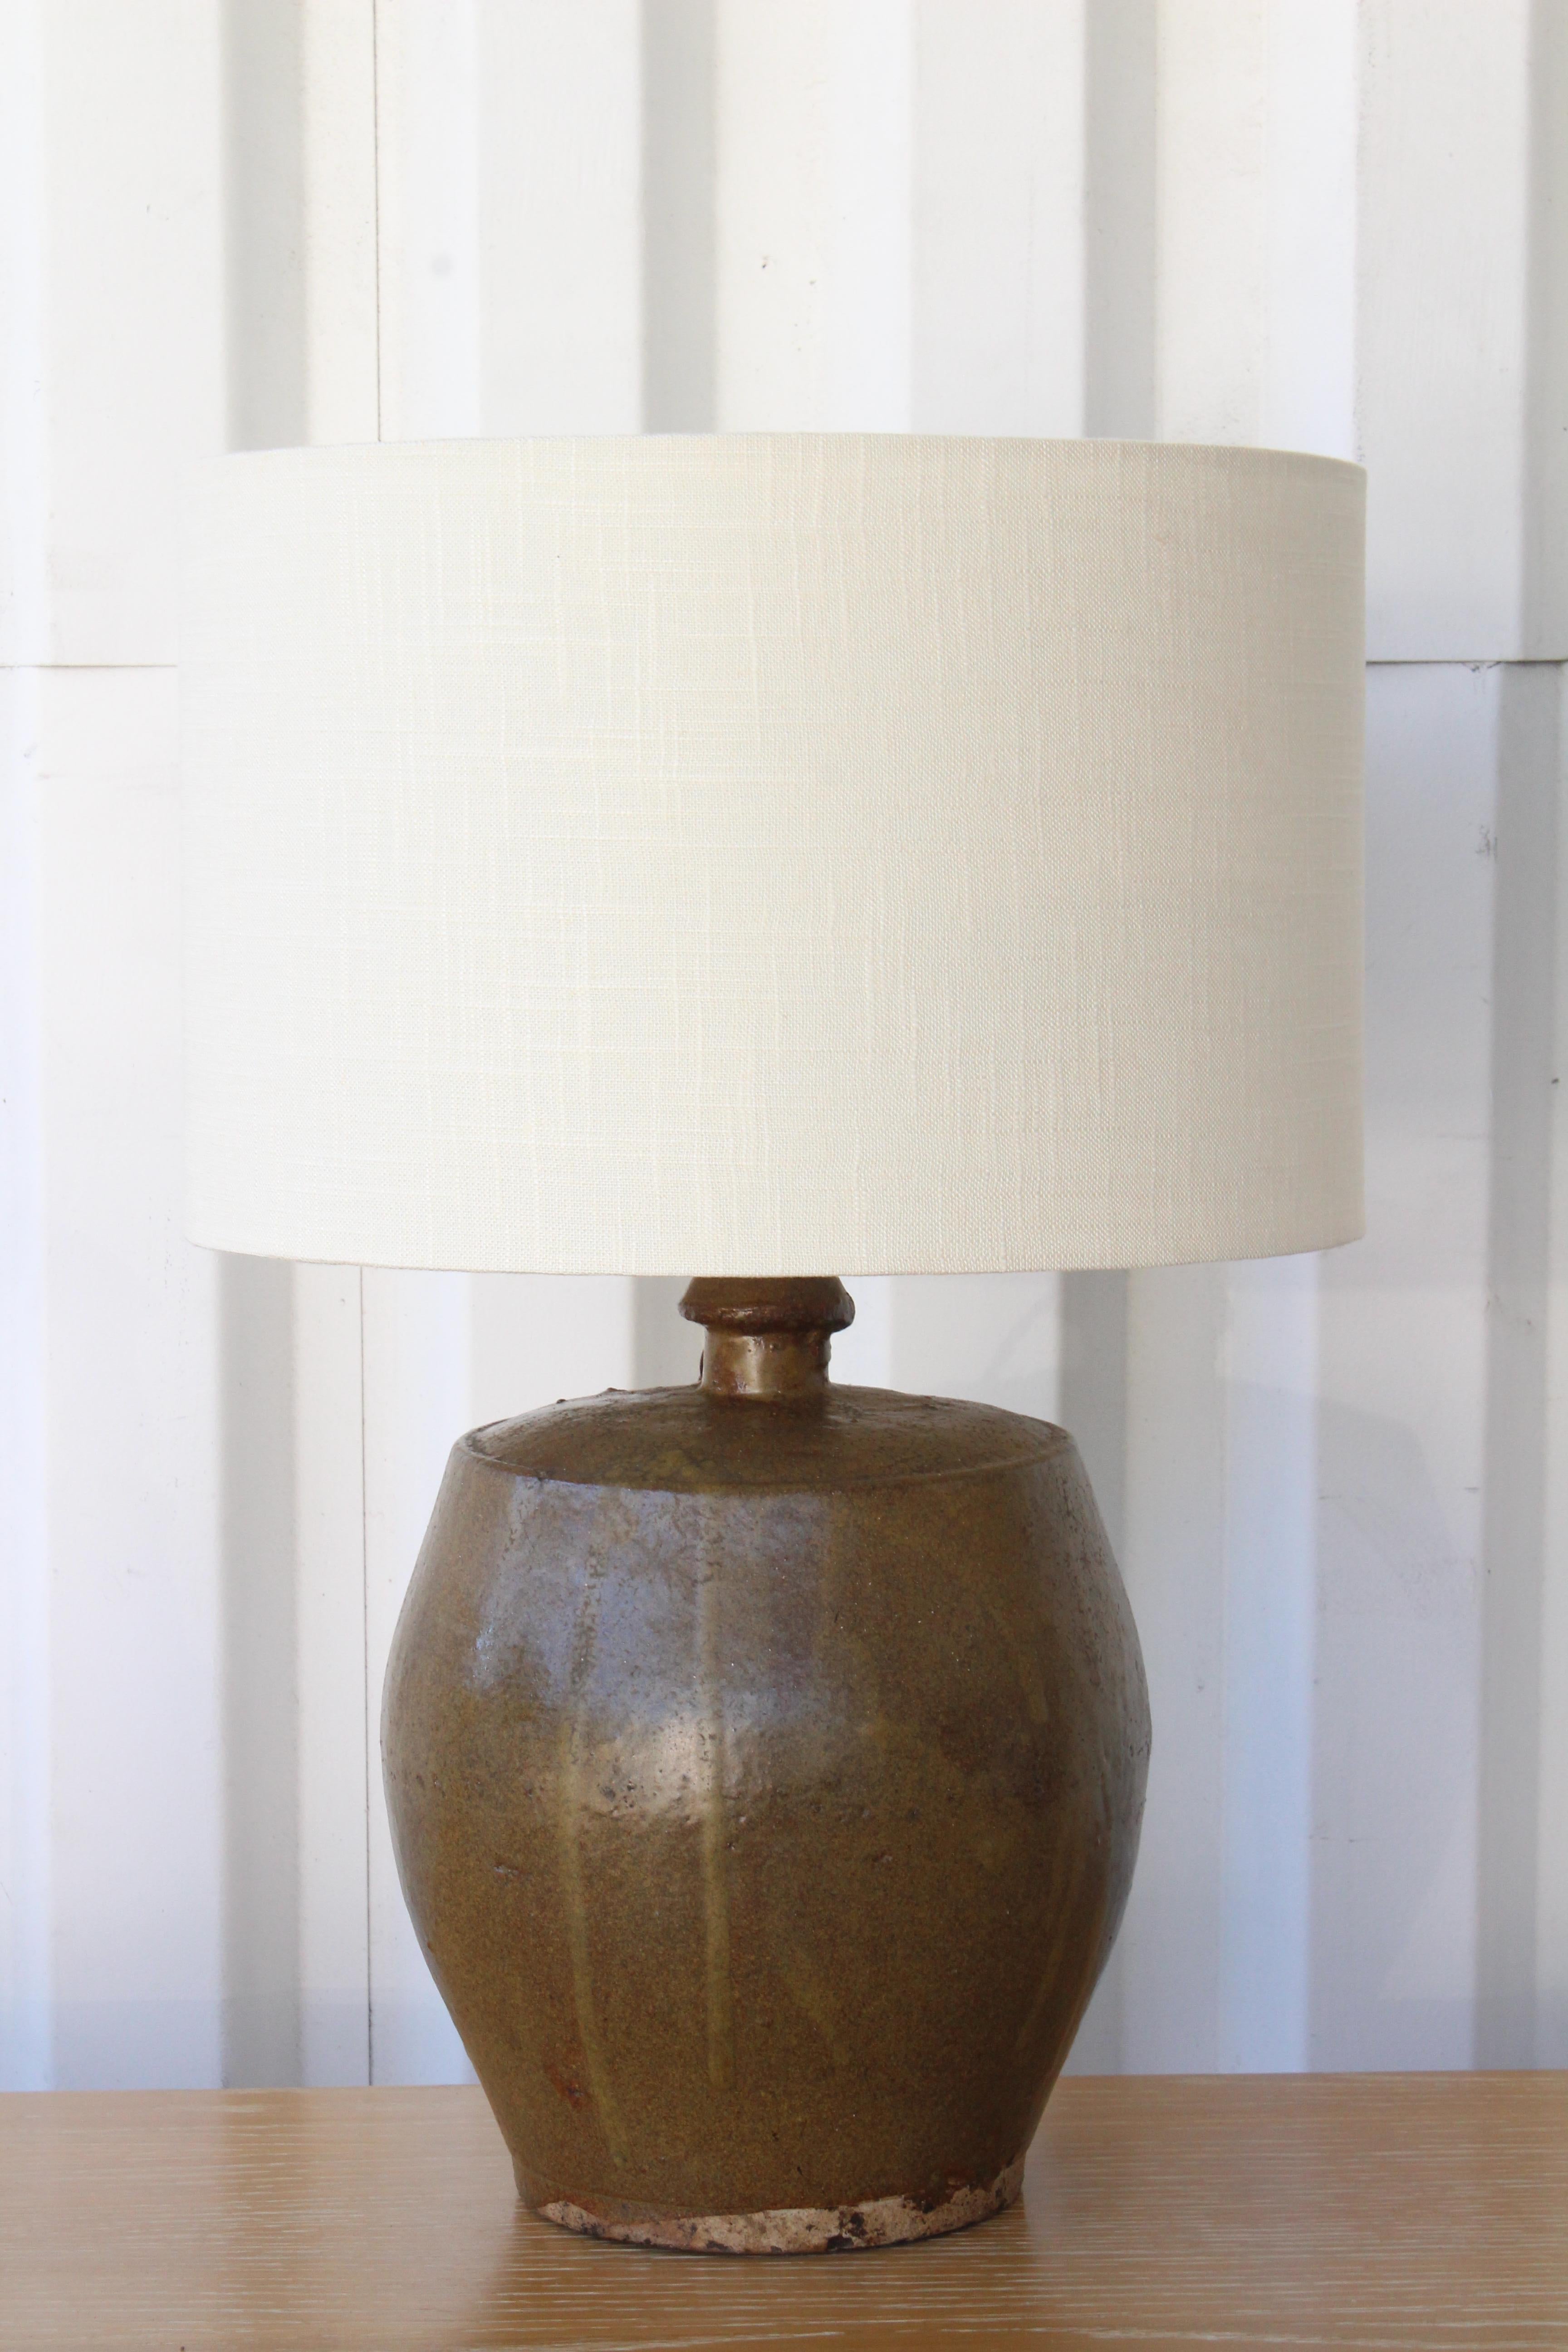 Vintage studio ceramic table lamp. New french wiring in a twisted silk cord. New custom made shade in linen. 21